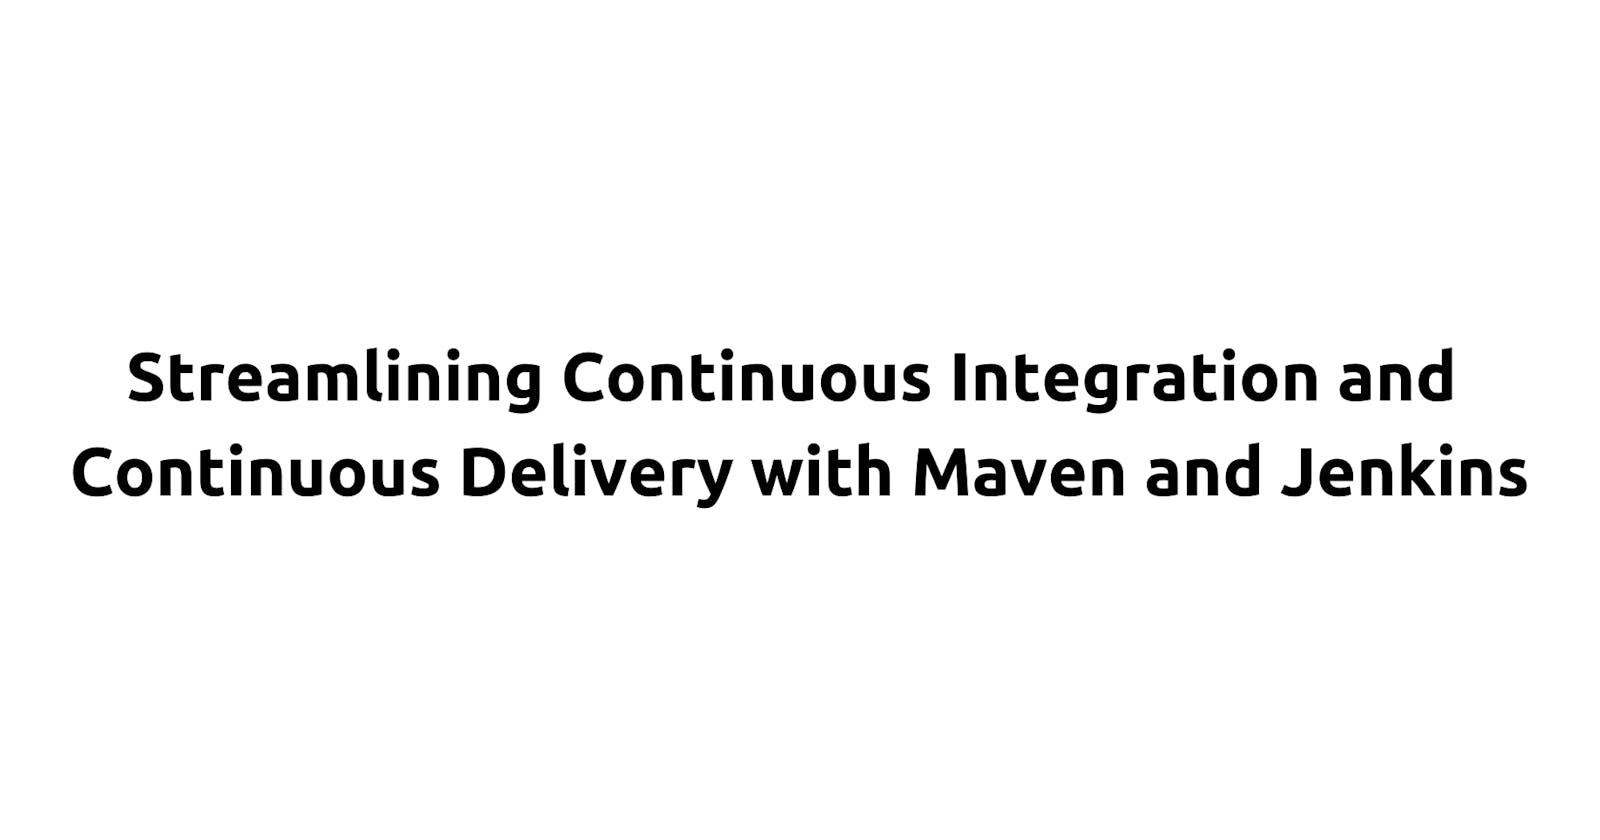 Streamlining Continuous Integration and Continuous Delivery with Maven and Jenkins